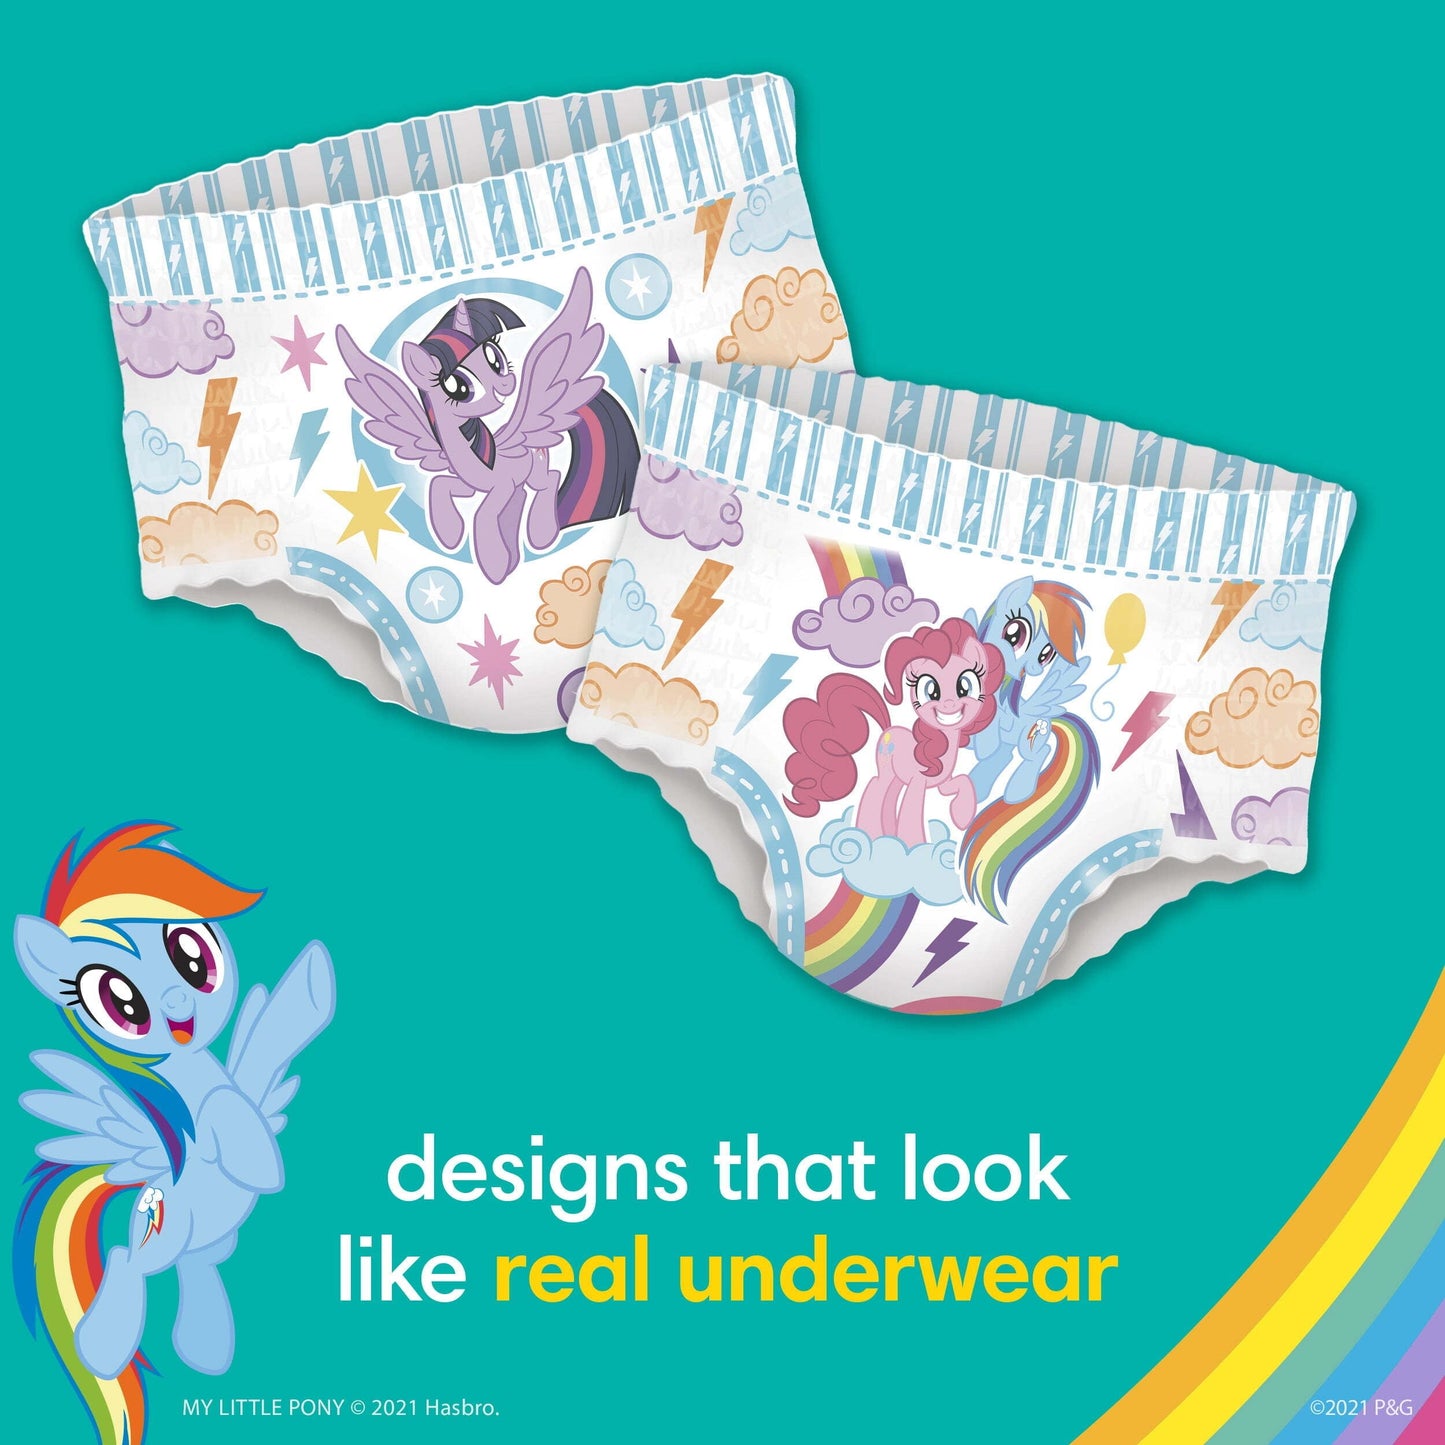 Pampers Easy Ups My Little Pony Training Pants Toddler Girls 3T/4T 108 Ct